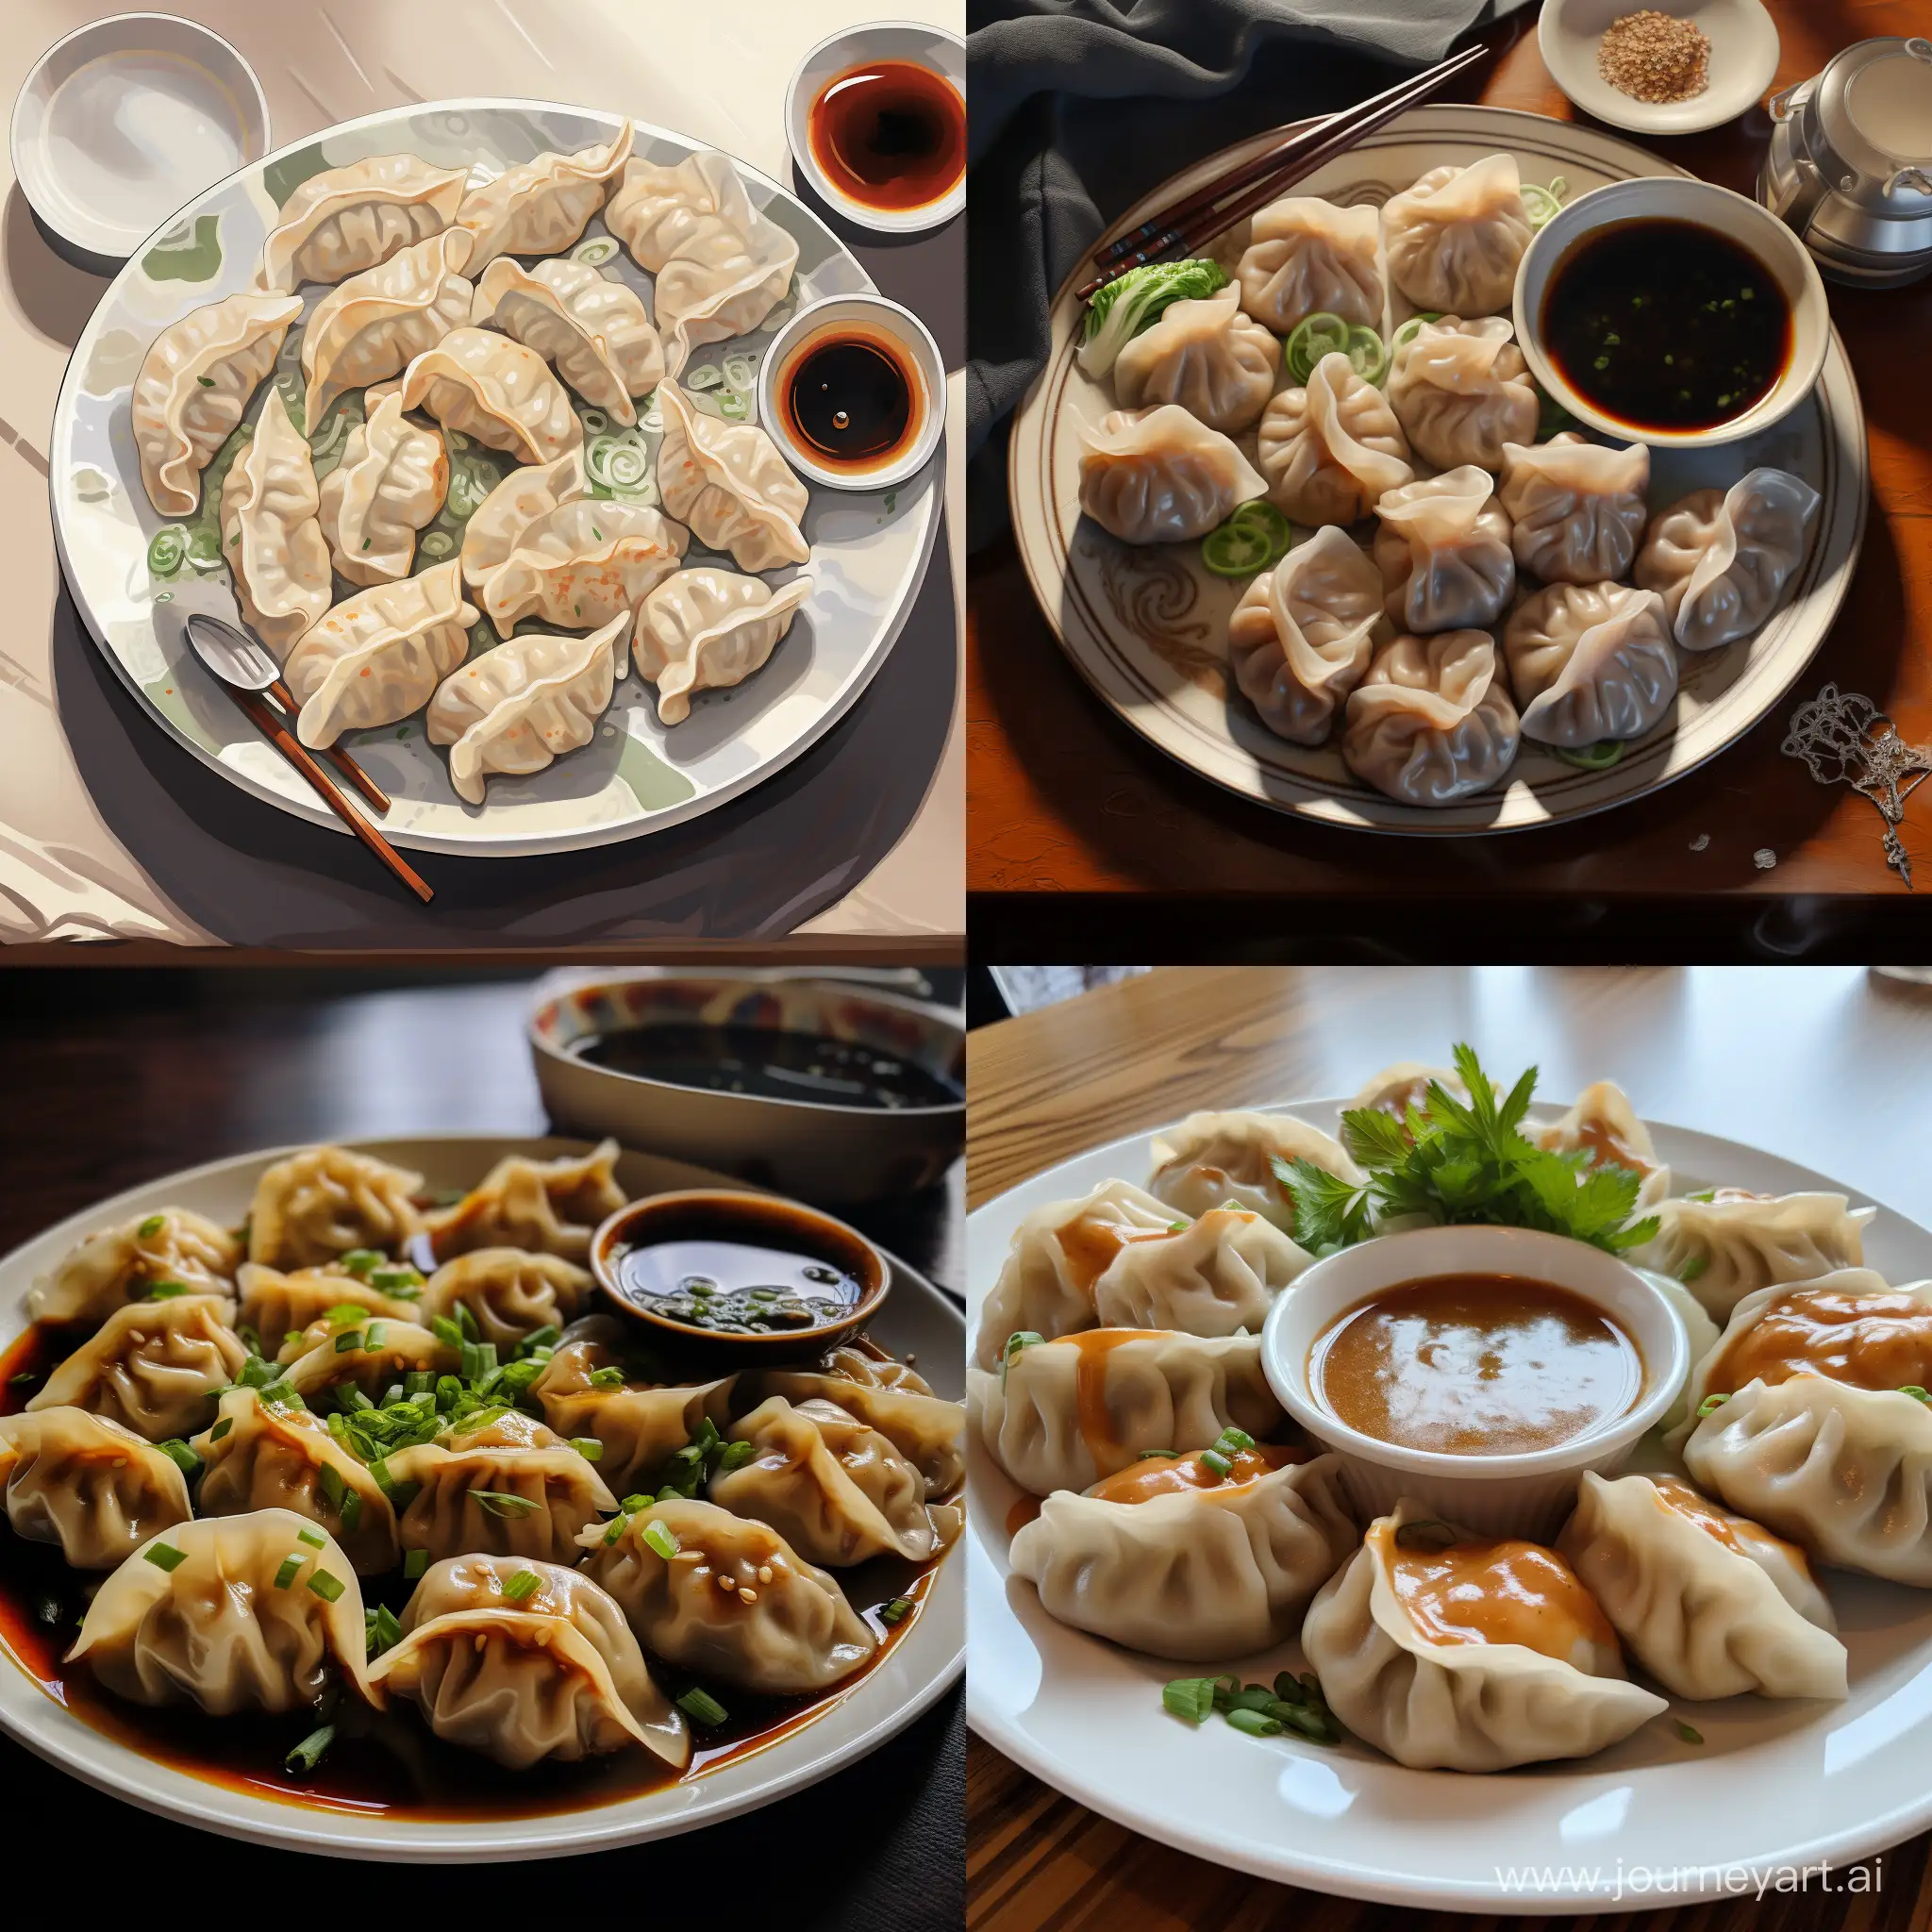 Delicious-Plate-of-Dumplings-Irresistible-Culinary-Delights